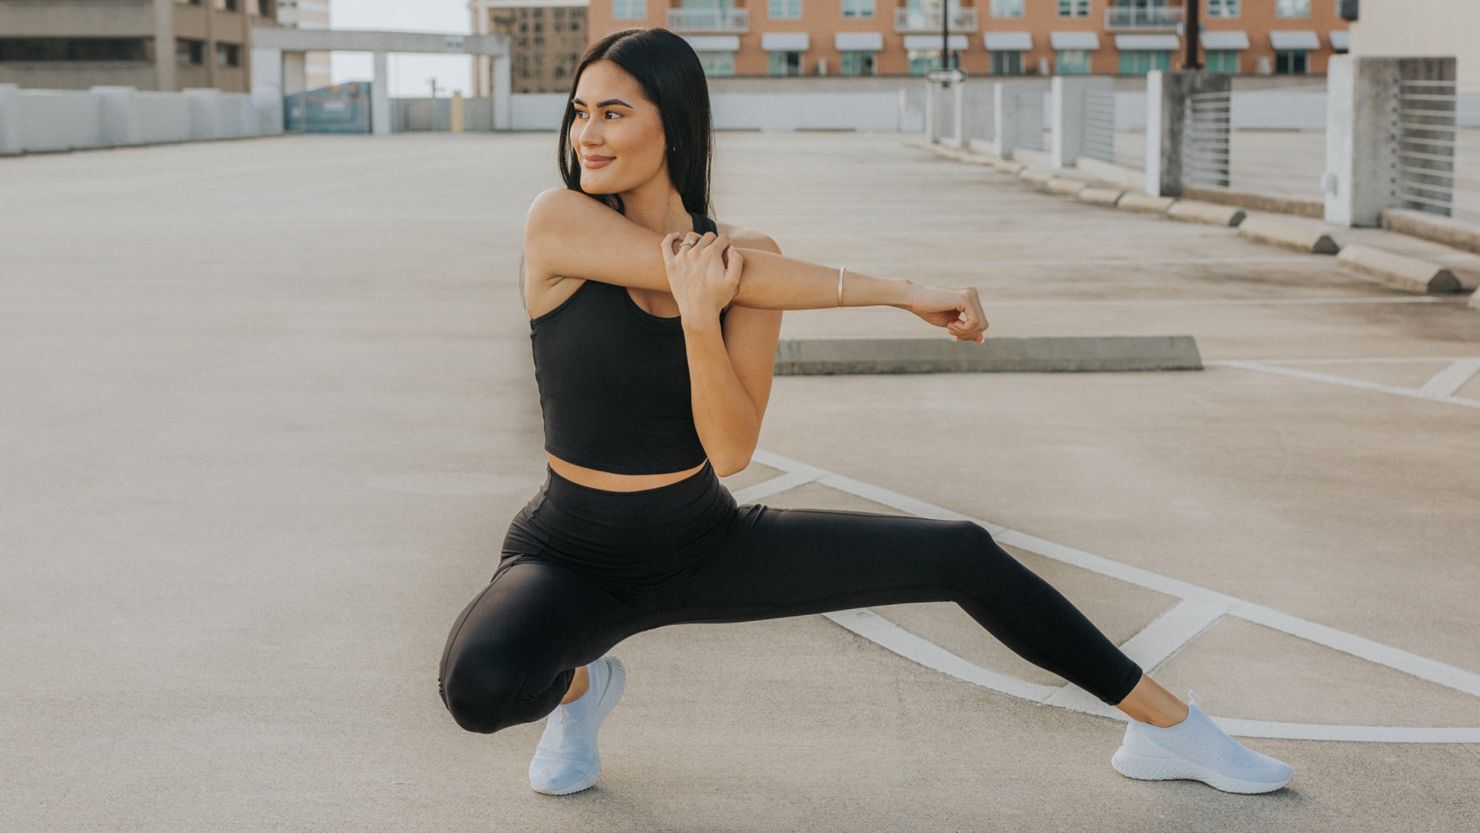 Colorfulkoala Leggings Are the Next Big Thing in Activewear